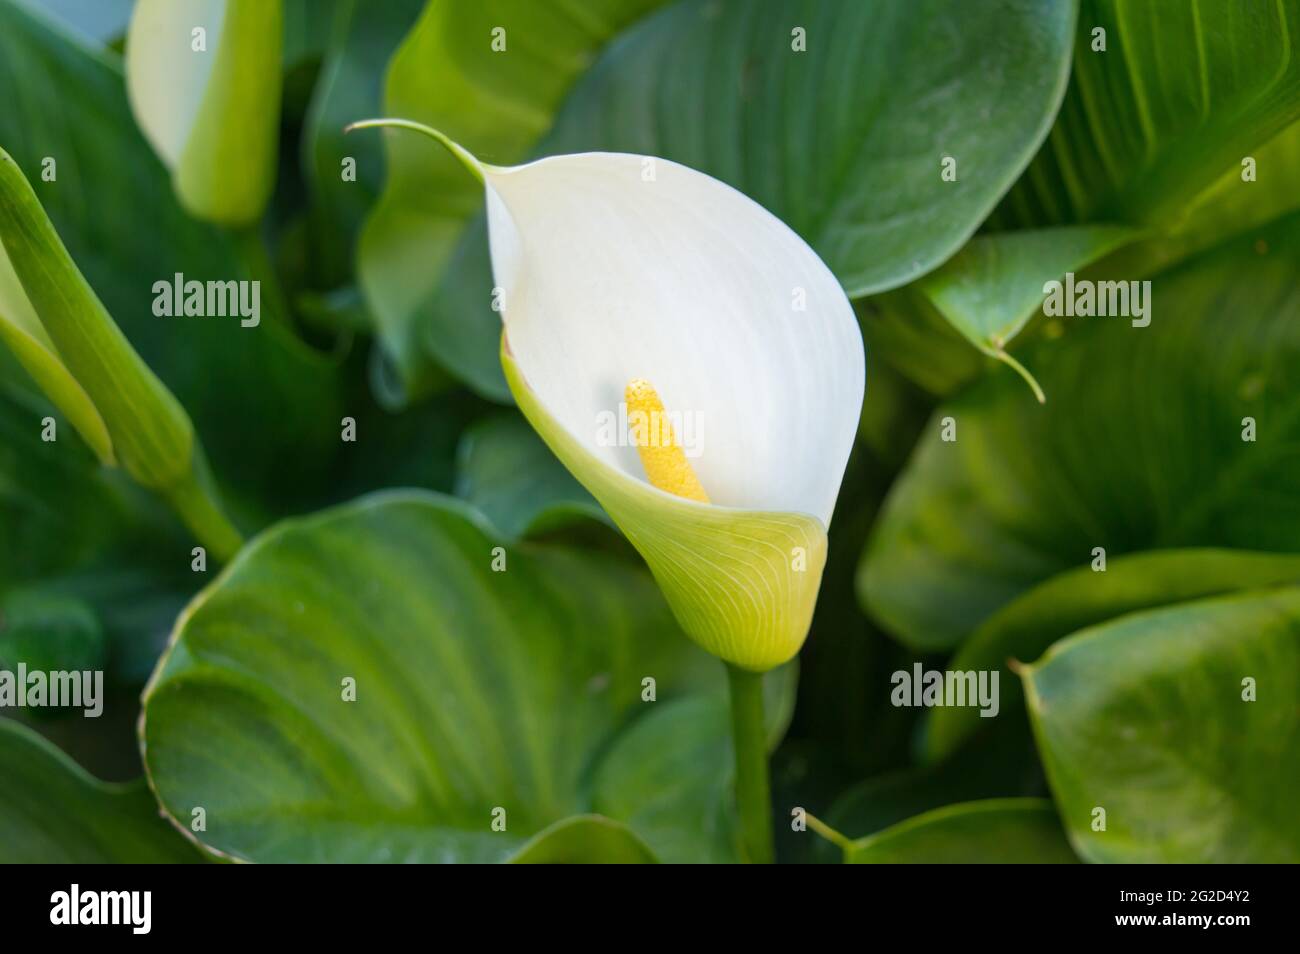 one in green large leaves Zantedeschia aethiopica, commonly known as calla lily and arum lily.close up. a simple and elegant calla lily. Stock Photo